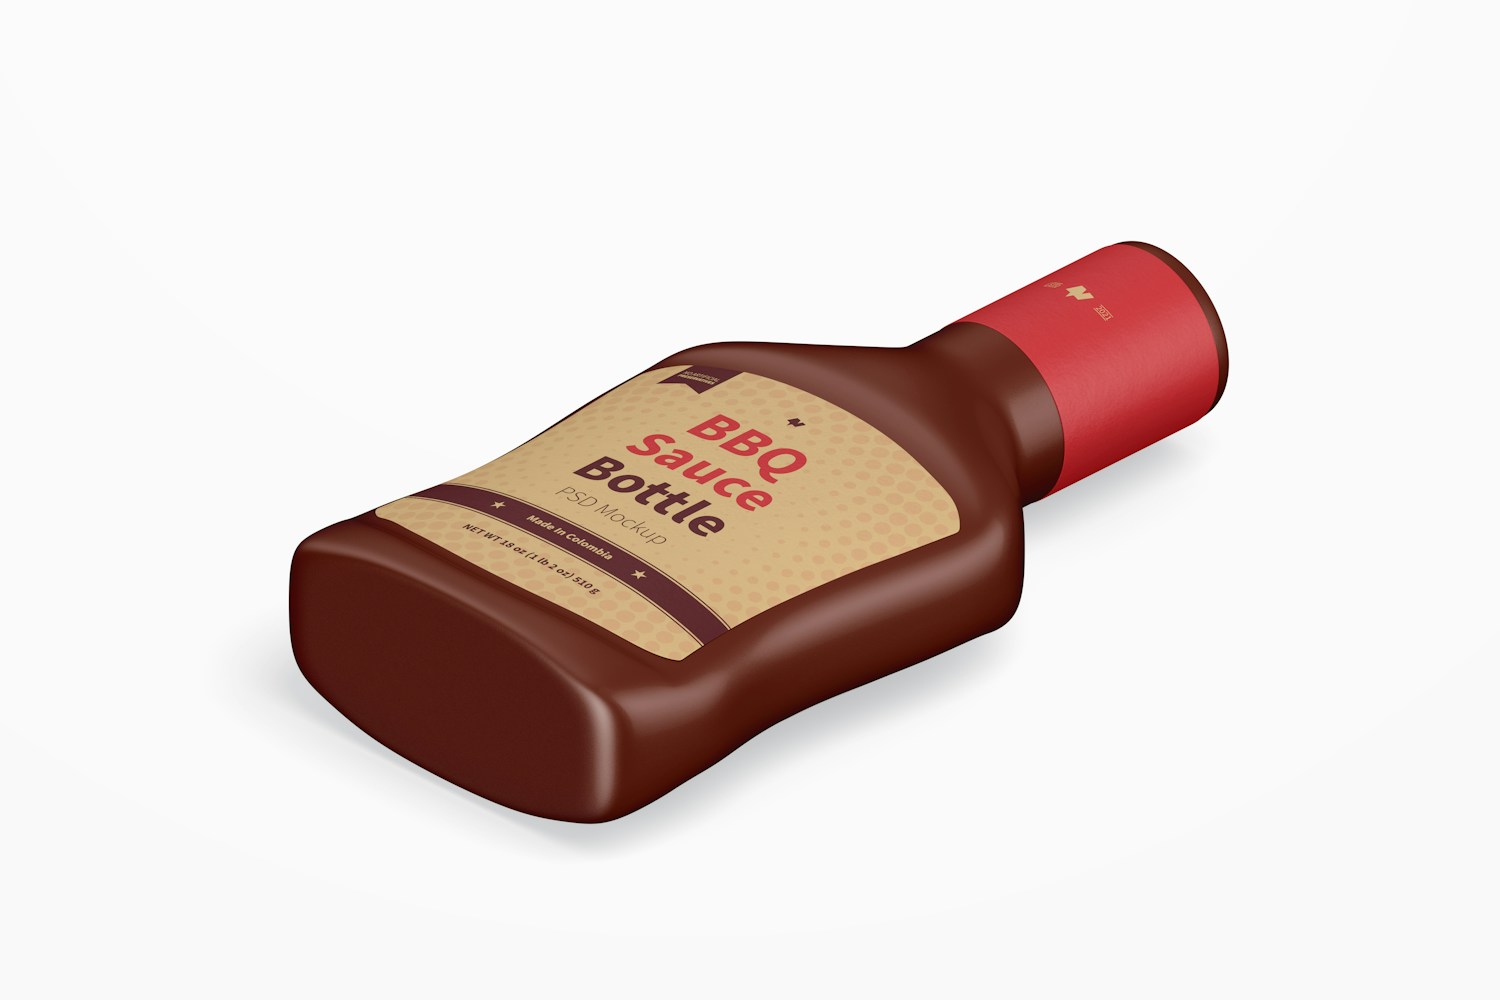 Barbecue Sauce Bottle Mockup, Isometric View